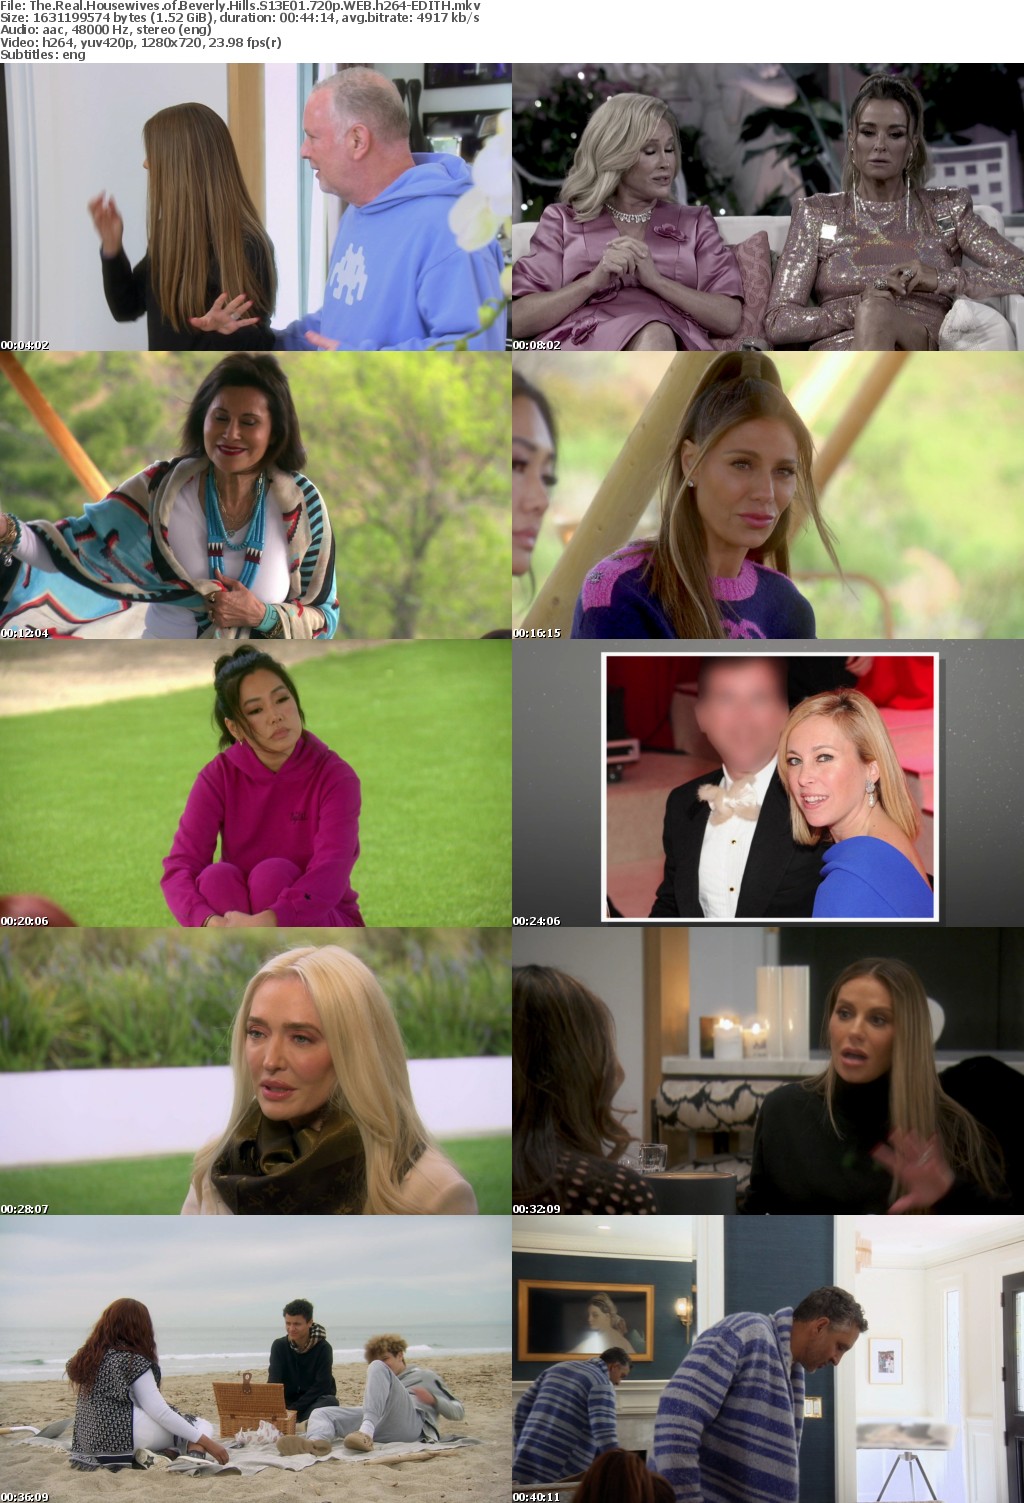 The Real Housewives of Beverly Hills S13E01 720p WEB h264-EDITH